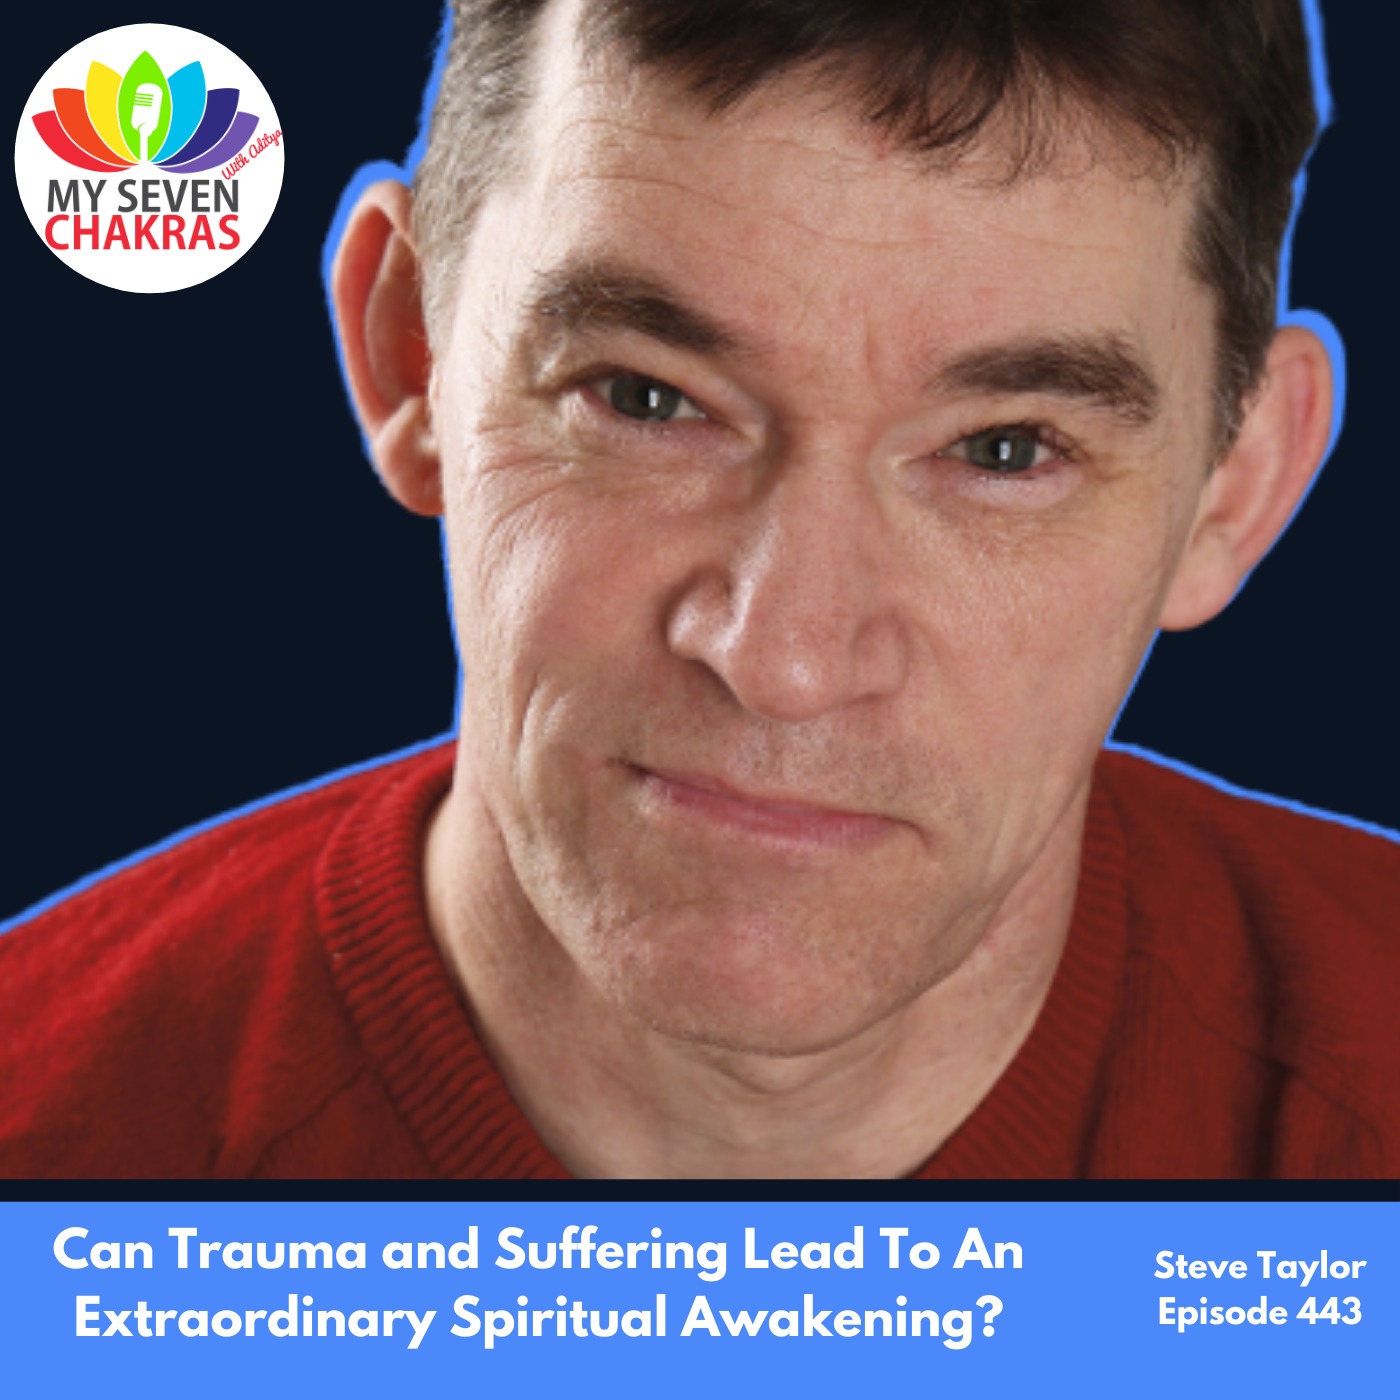 Can Trauma and Suffering Lead To An Extraordinary Spiritual Awakening with Steve Taylor